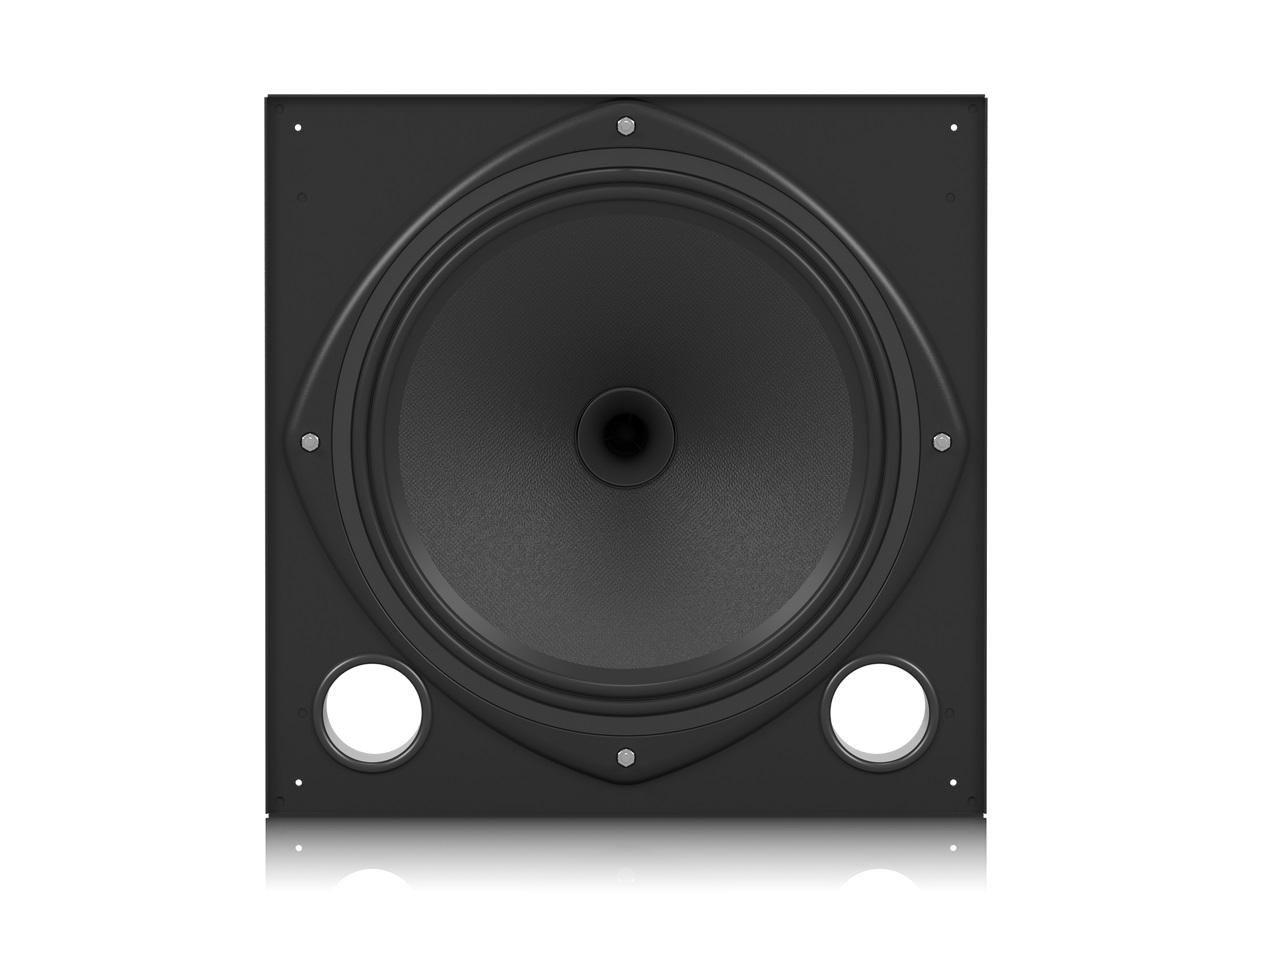 Tannoy Cms 1201dct 12in Ceiling Speaker Dual Concentric Driver